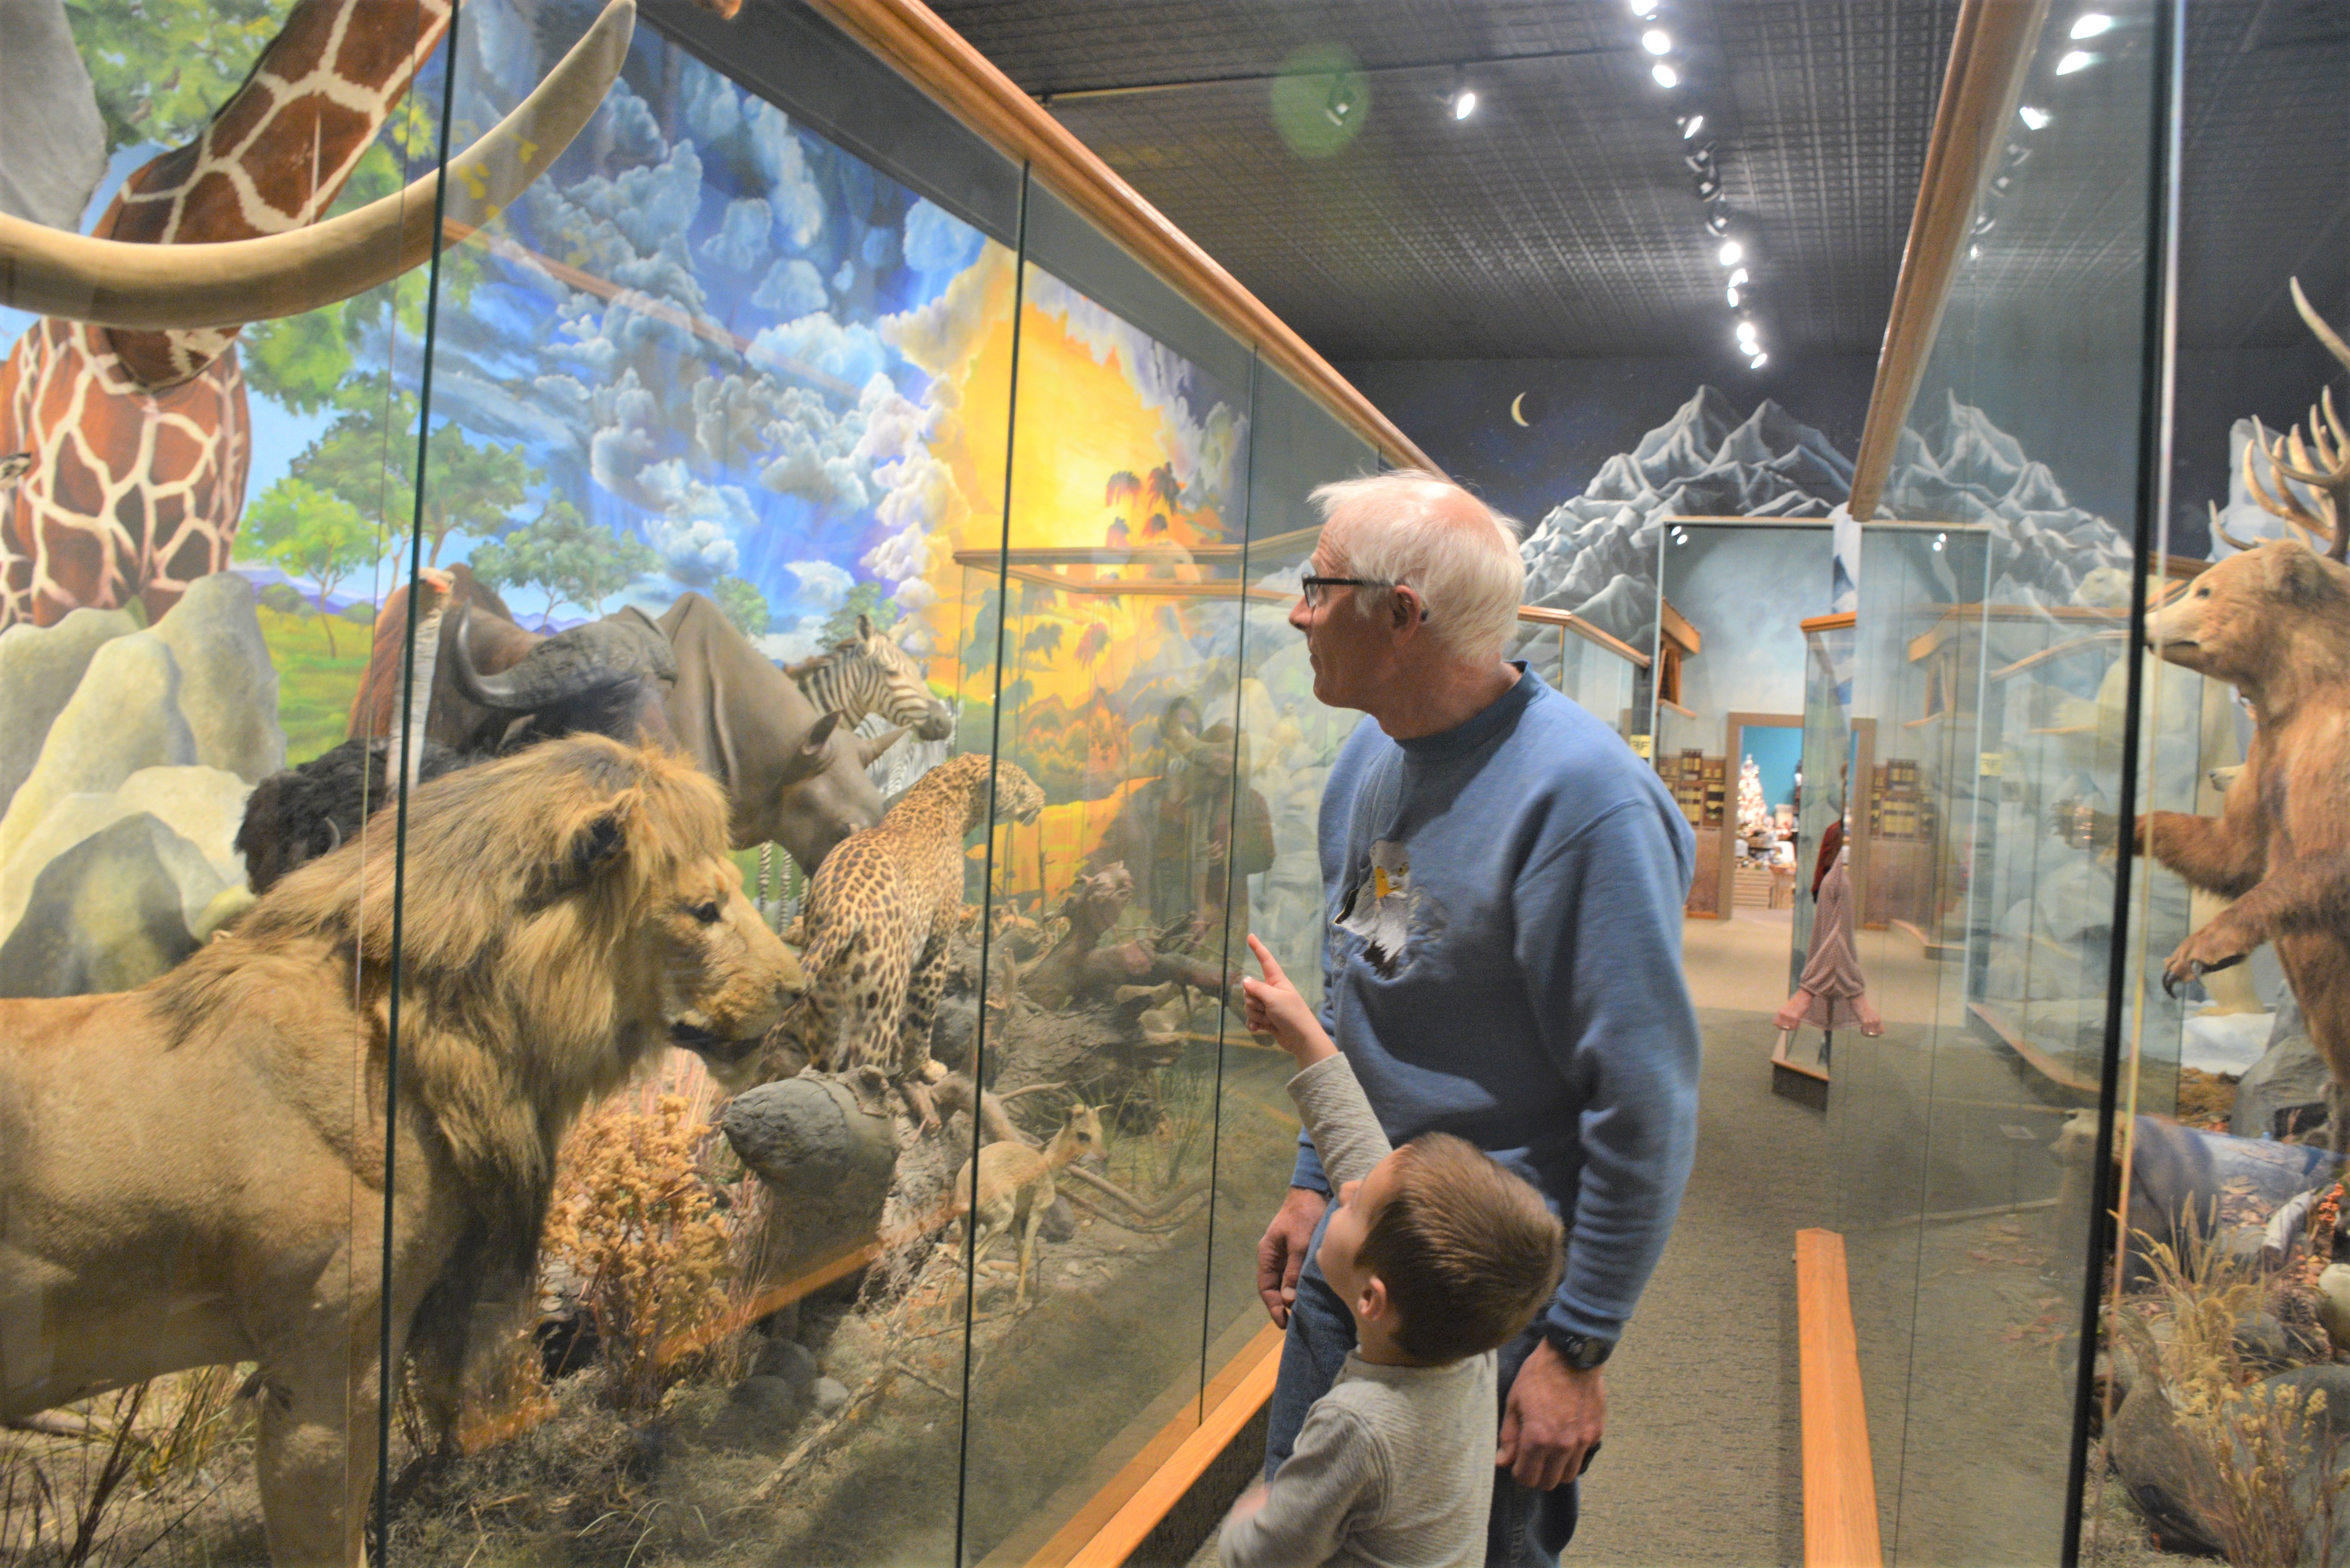 Brody and Grandpa at the Museum